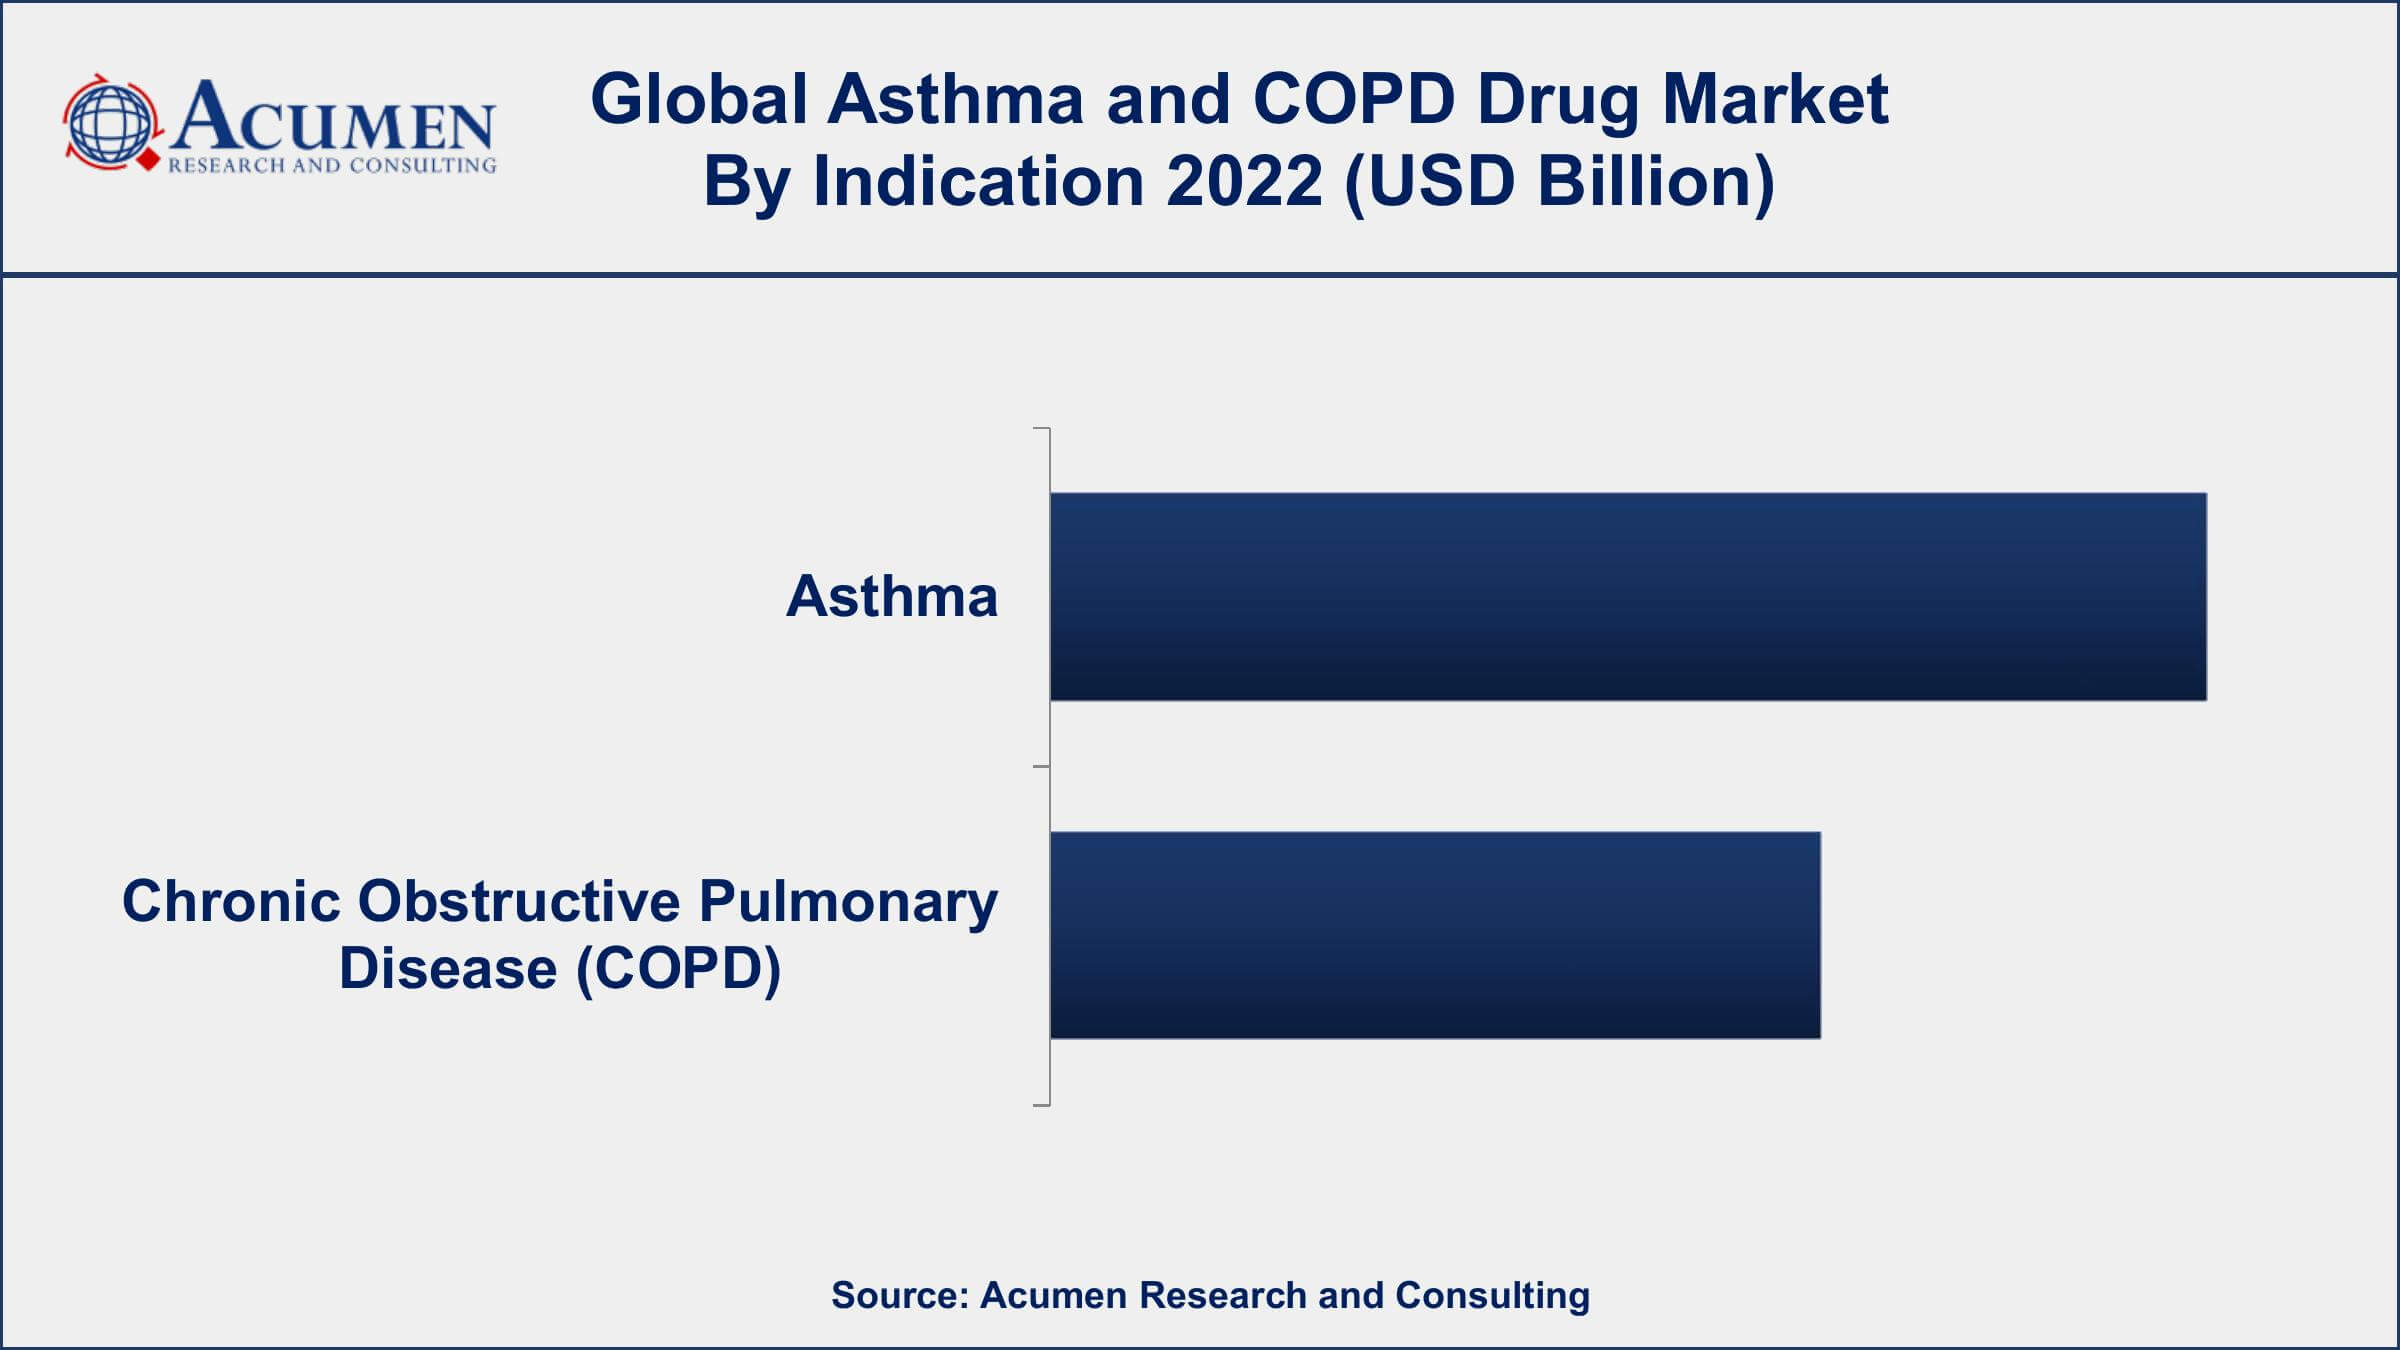 Asthma and COPD Drug Market Dynamics